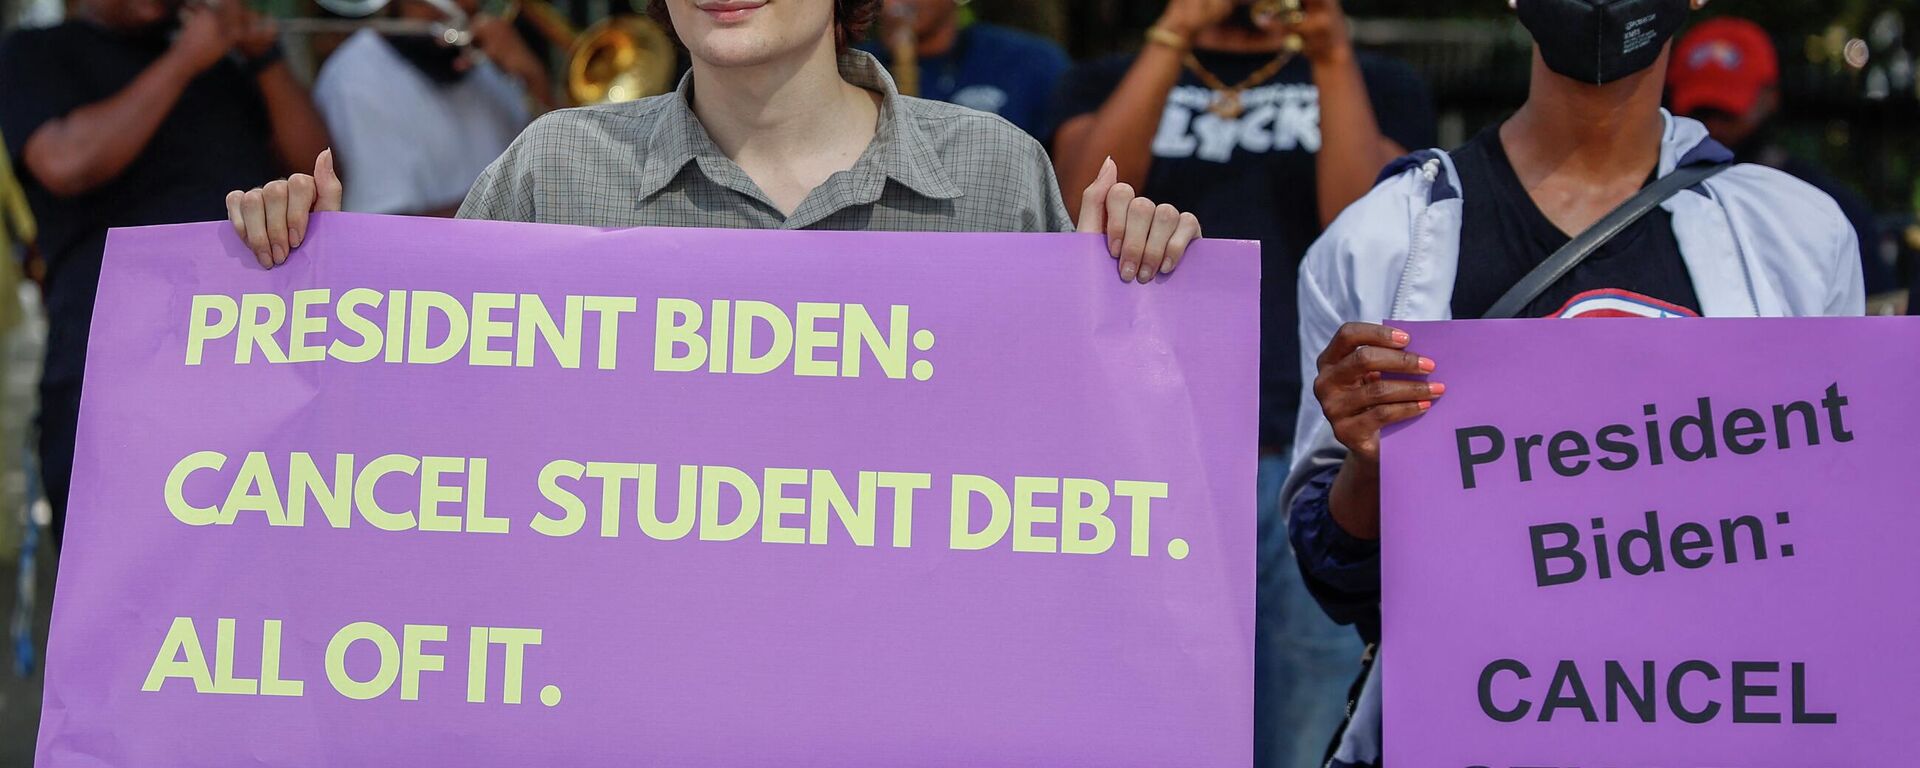 Student loan debt holders take part in a demonstration outside of the white house staff entrance to demand that President Biden cancel student loan debt in August on July 27, 2022 at the Executive Offices in Washington, DC.    - Sputnik International, 1920, 24.08.2022